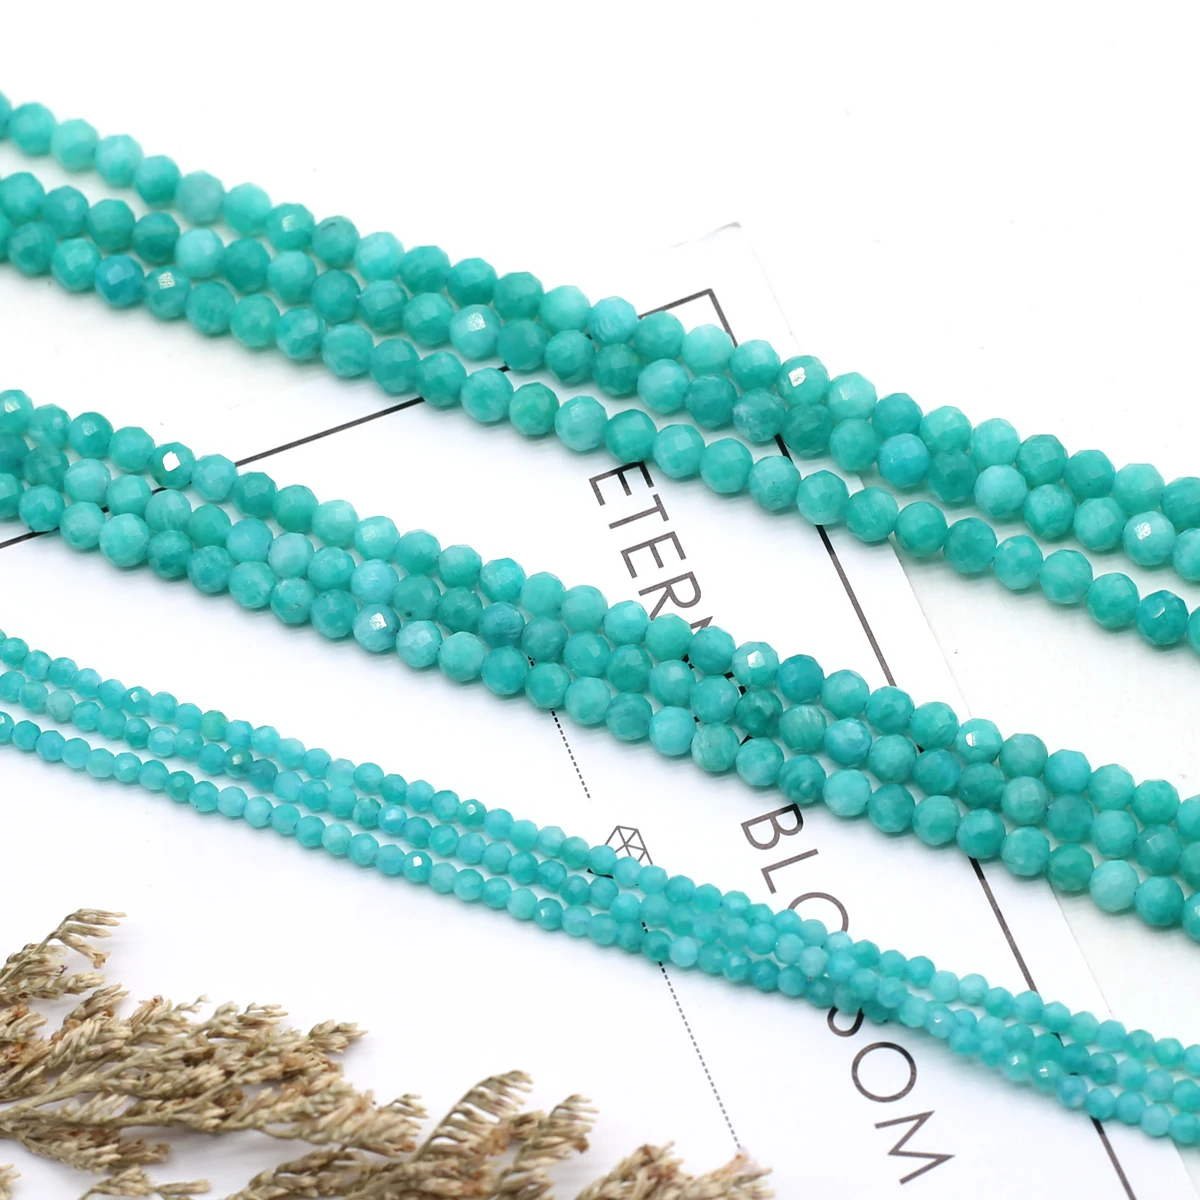 

Natural Stone Beads Small Section Bead Blue Amazonite 2 3 4mm Loose beads for Jewelry Making DIY Bracelet Necklace Length 38cm